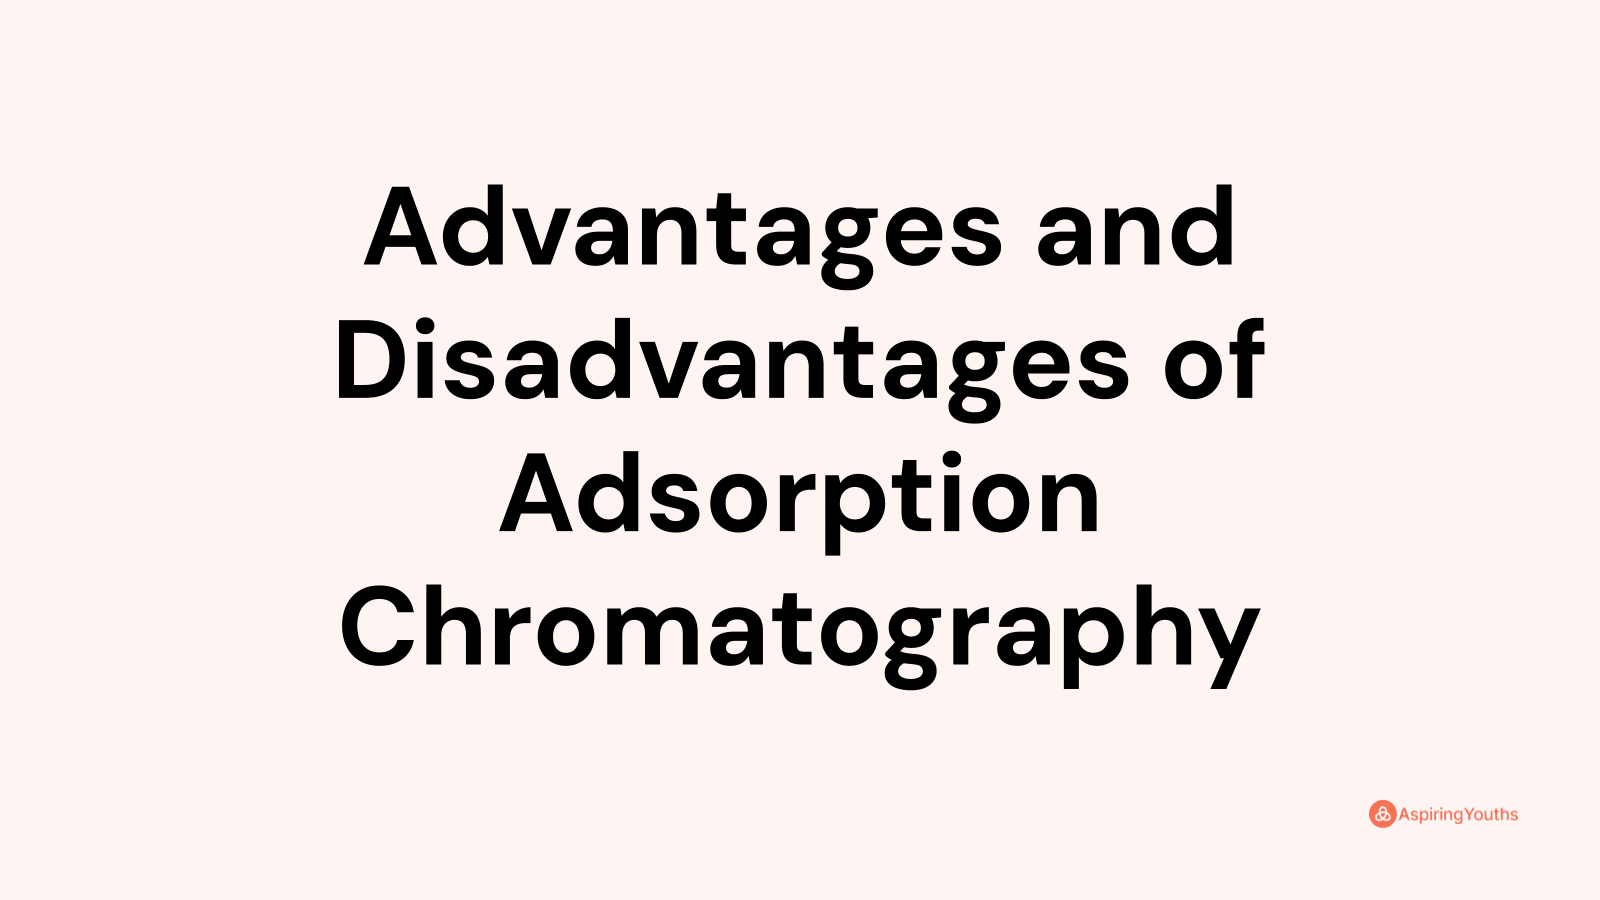 Advantages and disadvantages of Adsorption Chromatography